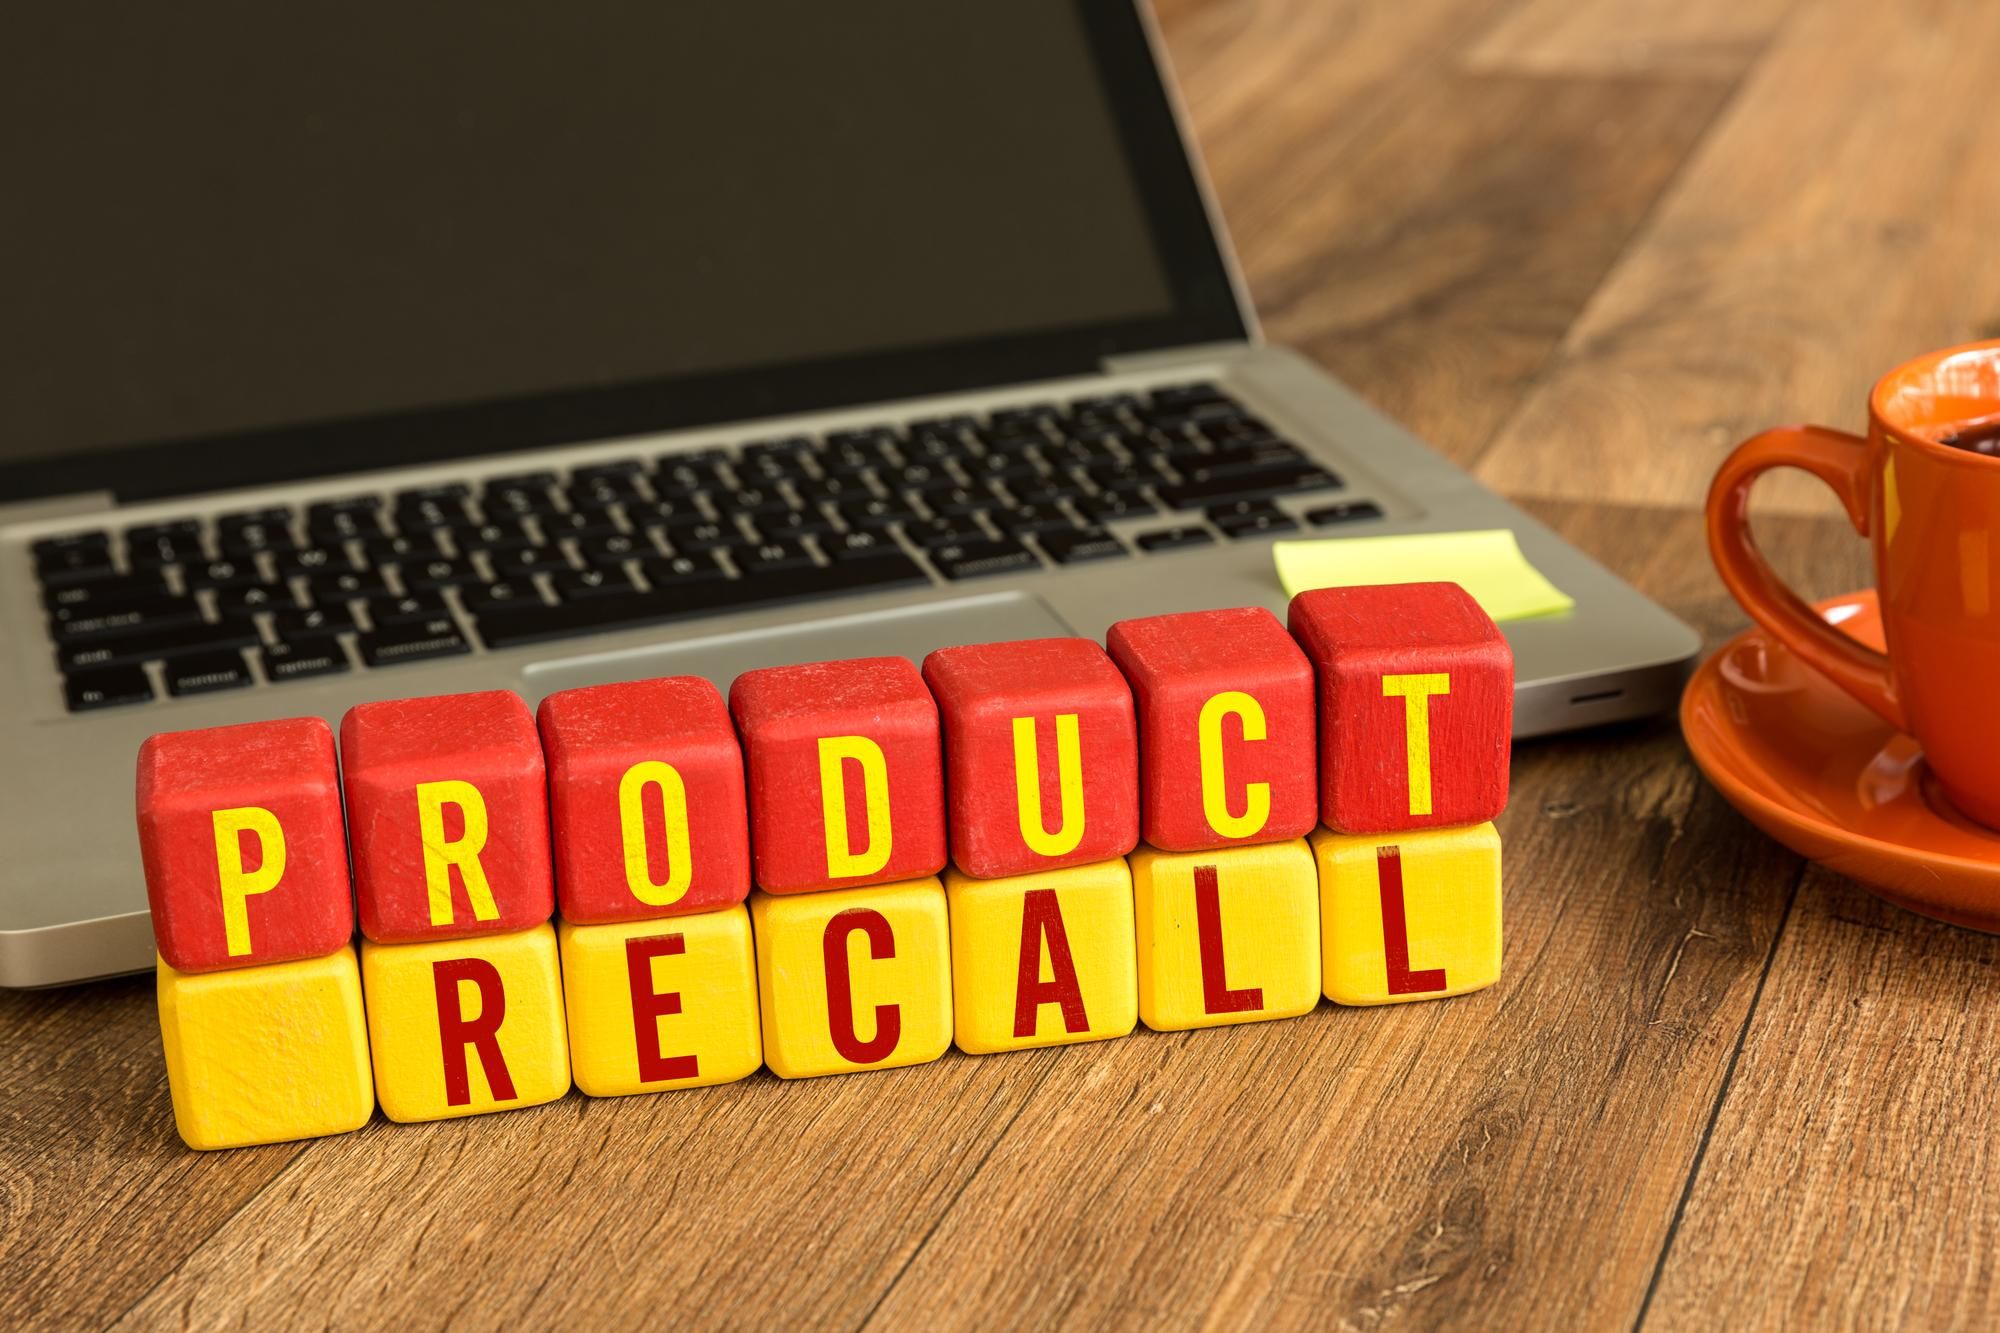 Product recall written in blocks regarding Health Canada recalling a couple of children's products over hazard concerns